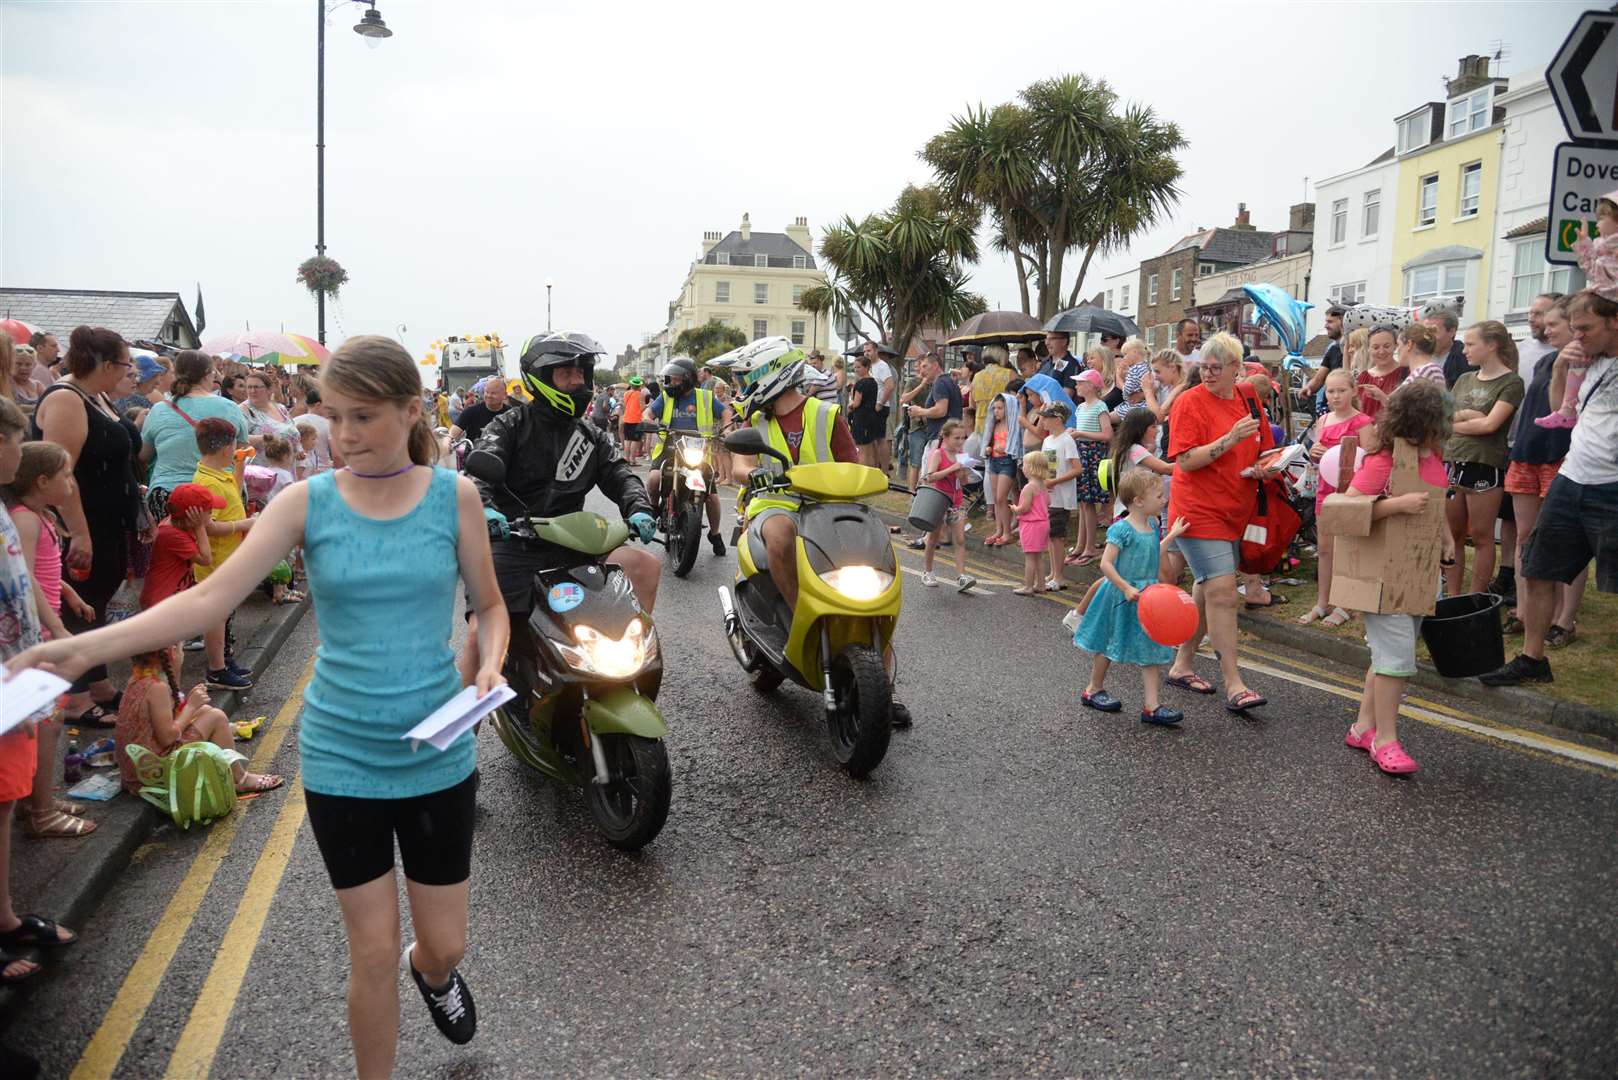 The procession attracted thousands to the seafront for Deal carnival